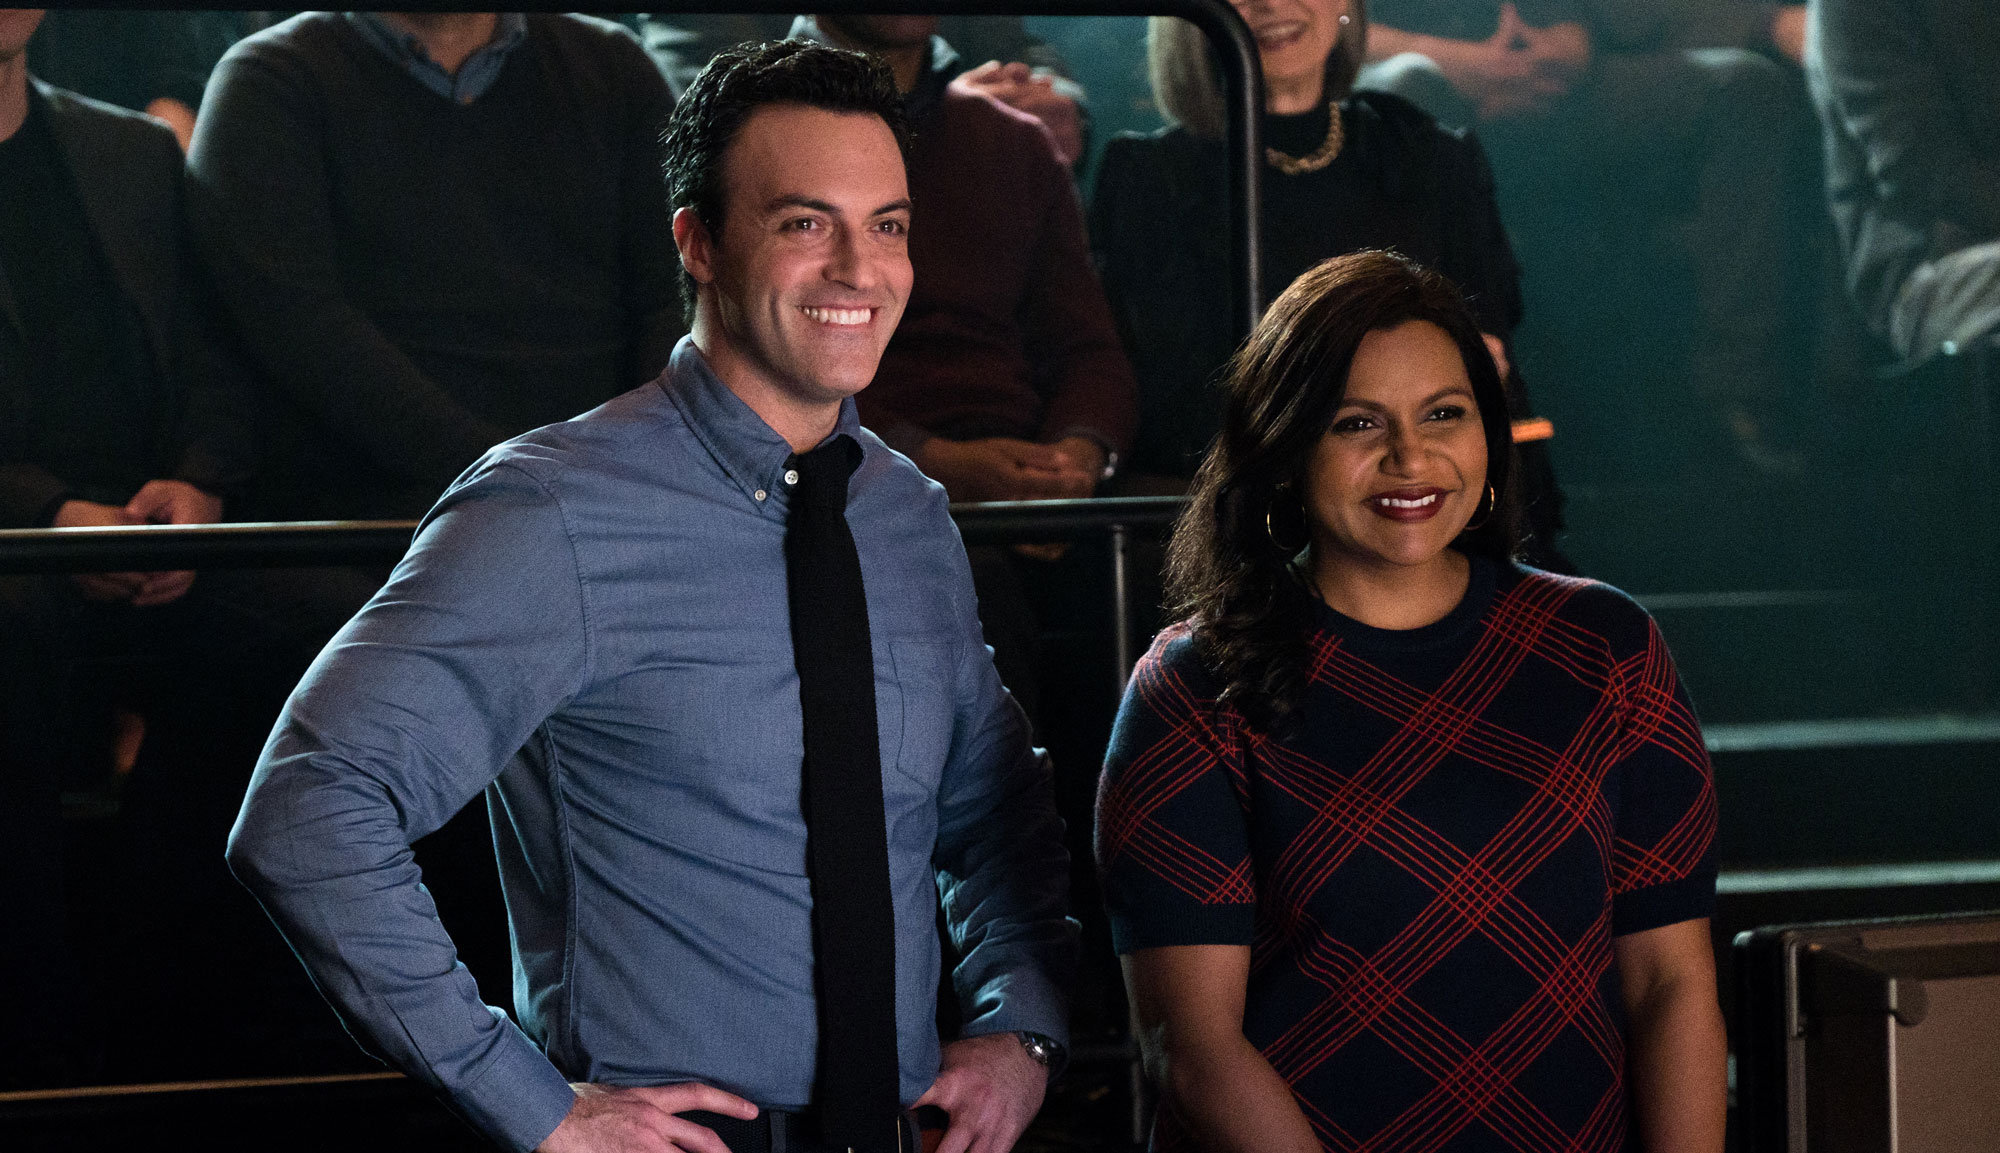 Mindy Kaling and Reid Scott in "Late Night"